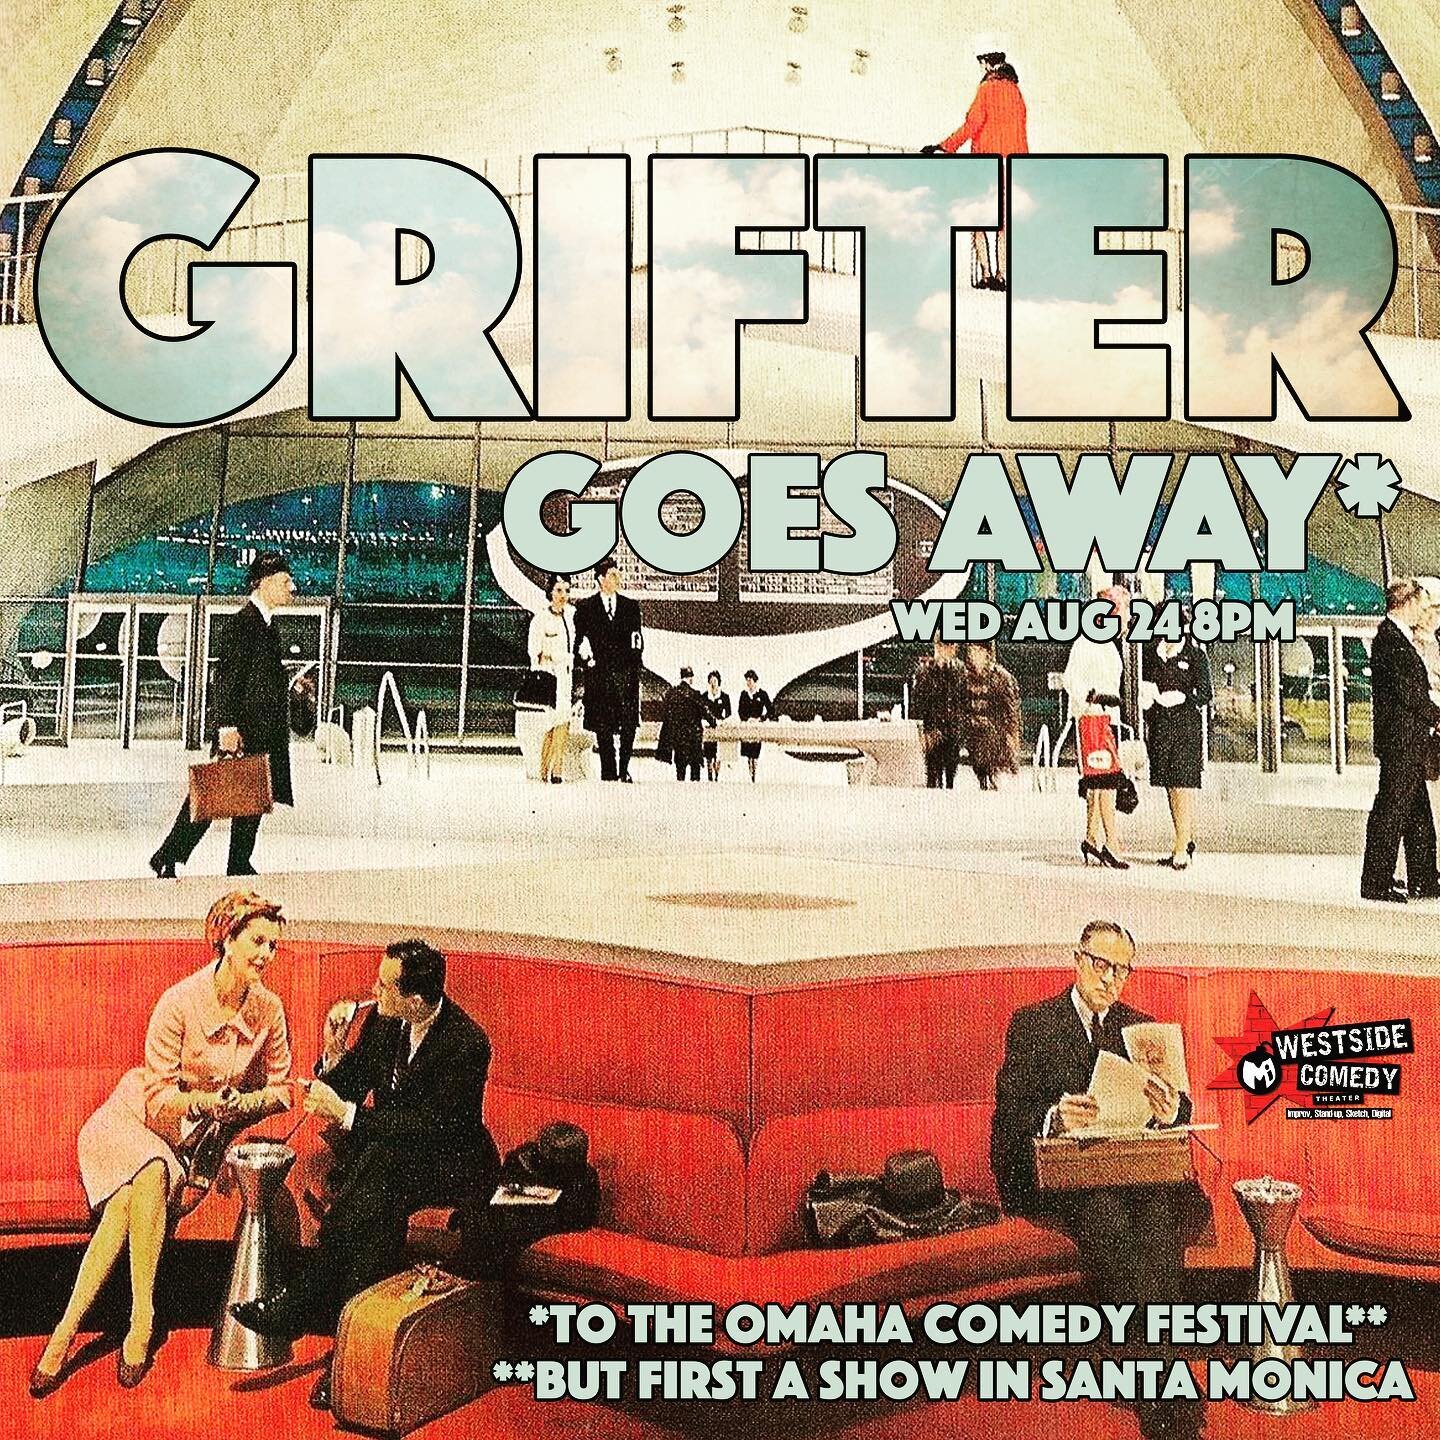 Grifter Goes Away*
*to the Omaha Comedy Festival**
**but first a show in Santa Monica

Grifter is getting ready to hit the road and open for Amber Ruffin in the Omaha Comedy Festival -- but first, they take the stage once again at Westside with some 